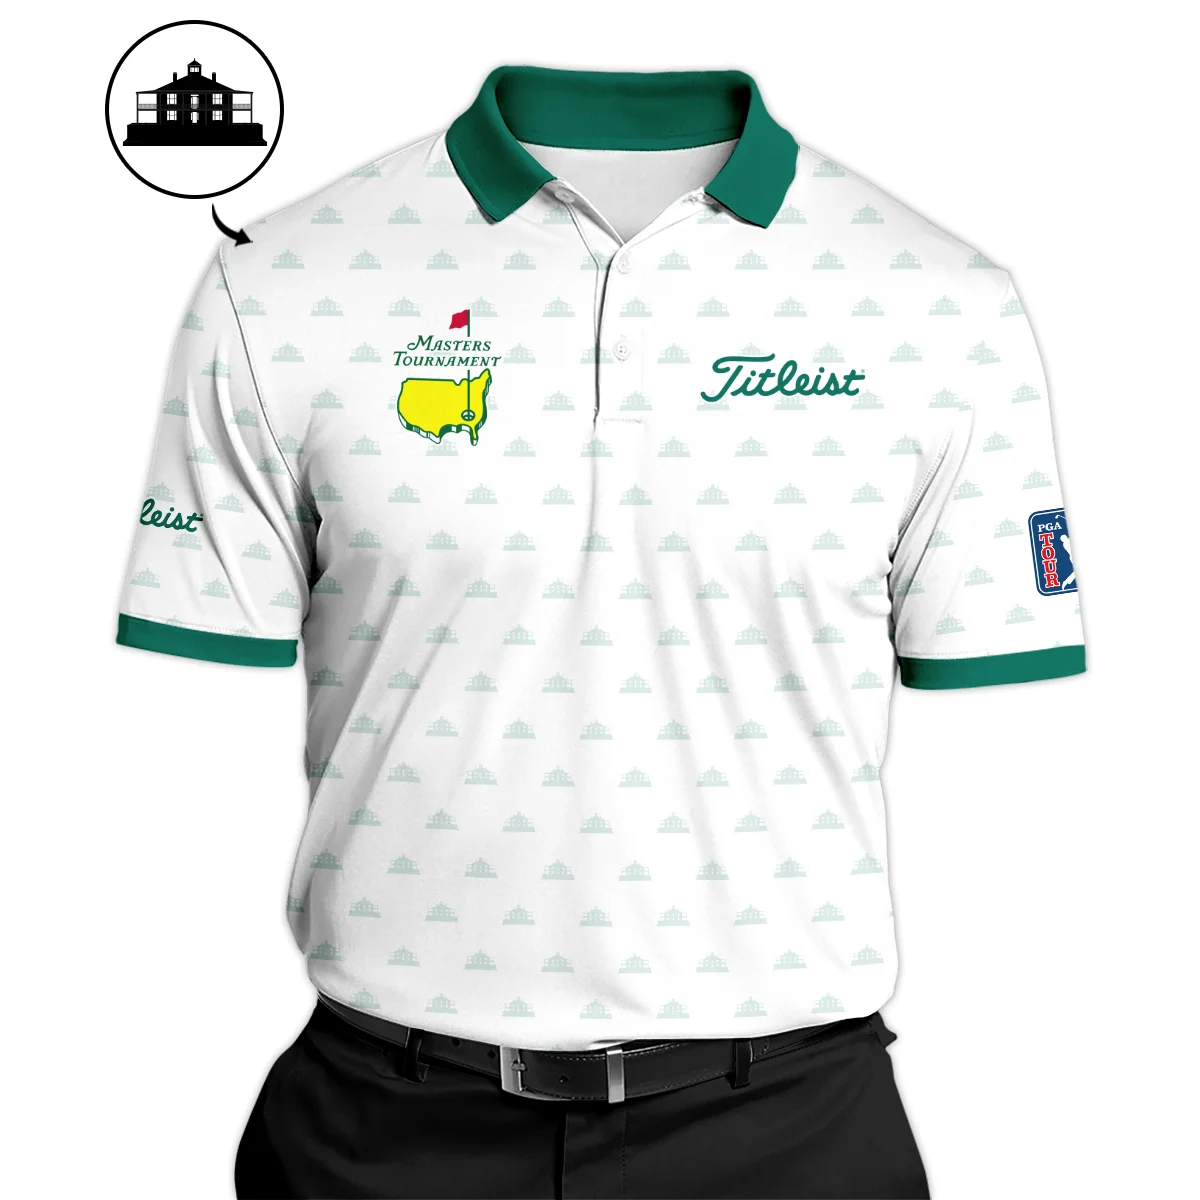 Masters Tournament Golf Sport Titleist Polo Shirt Sports Cup Pattern White Green Polo Shirt For Men